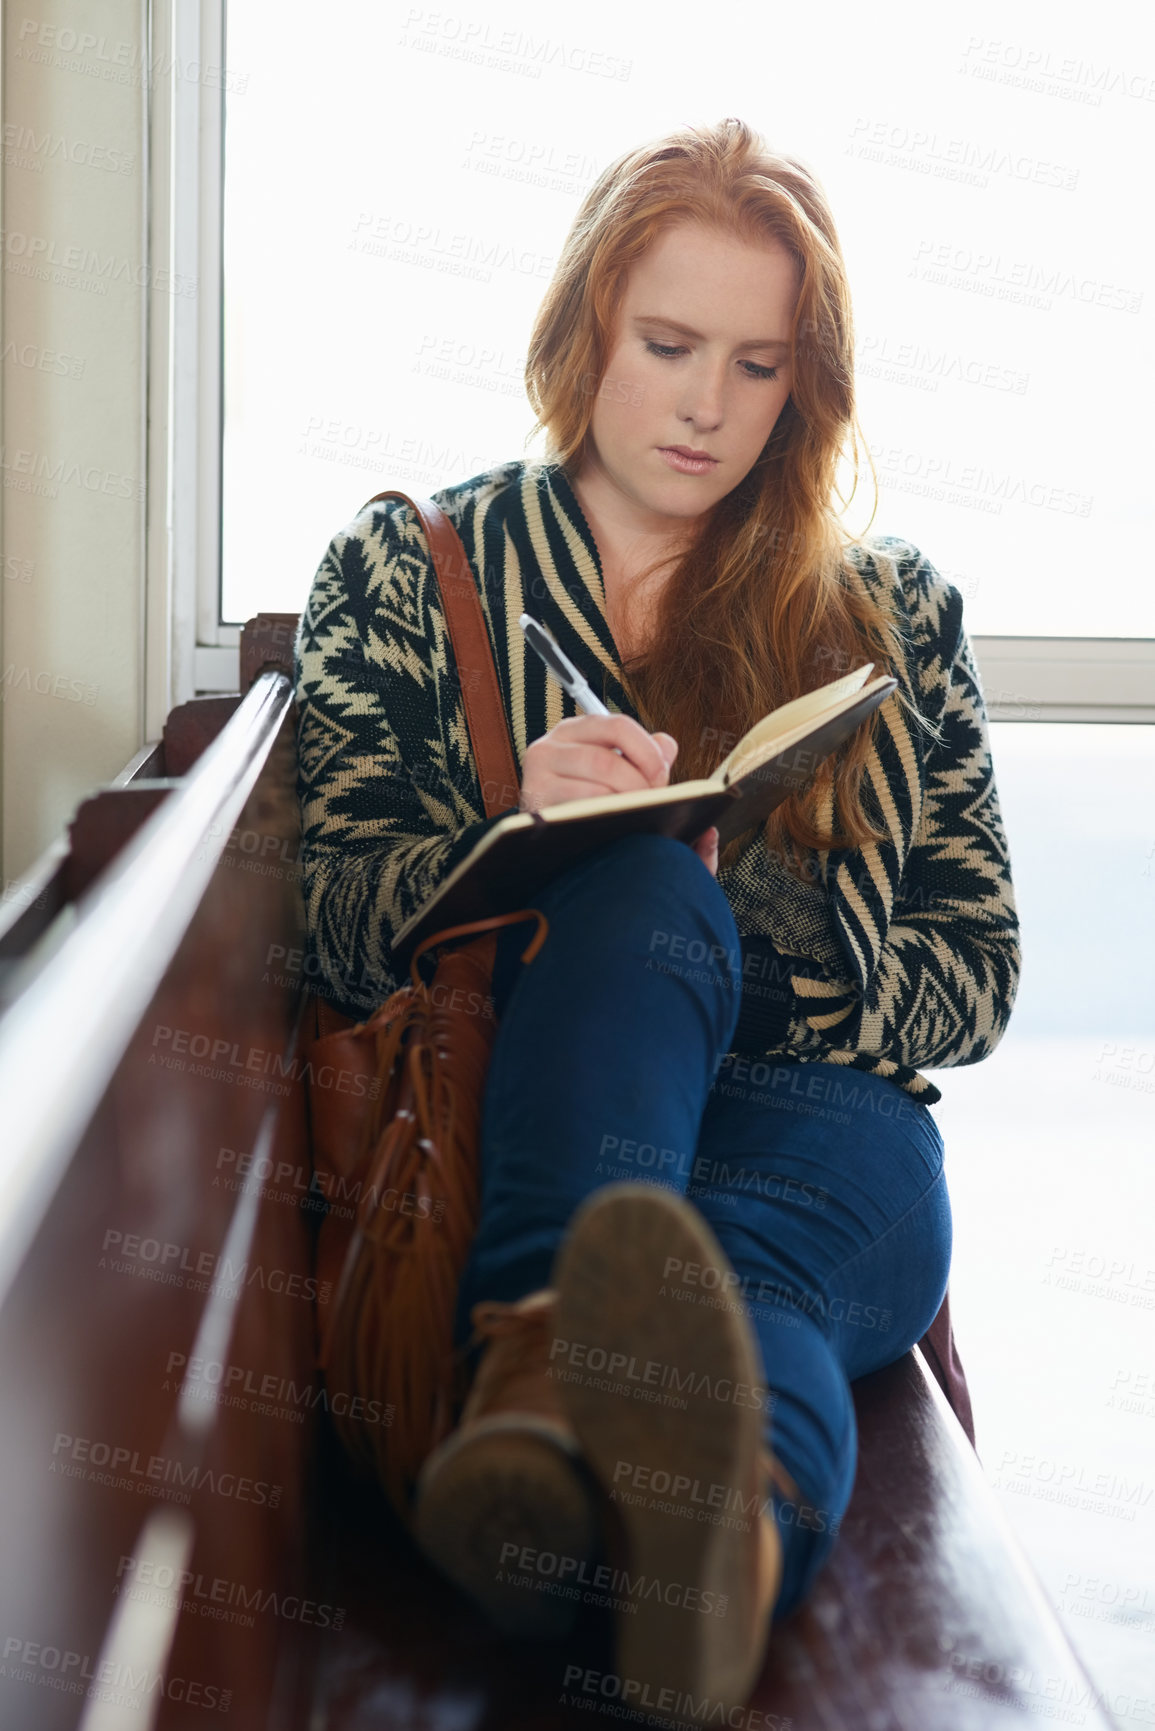 Buy stock photo Shot of a university student writing in her notebook on campus